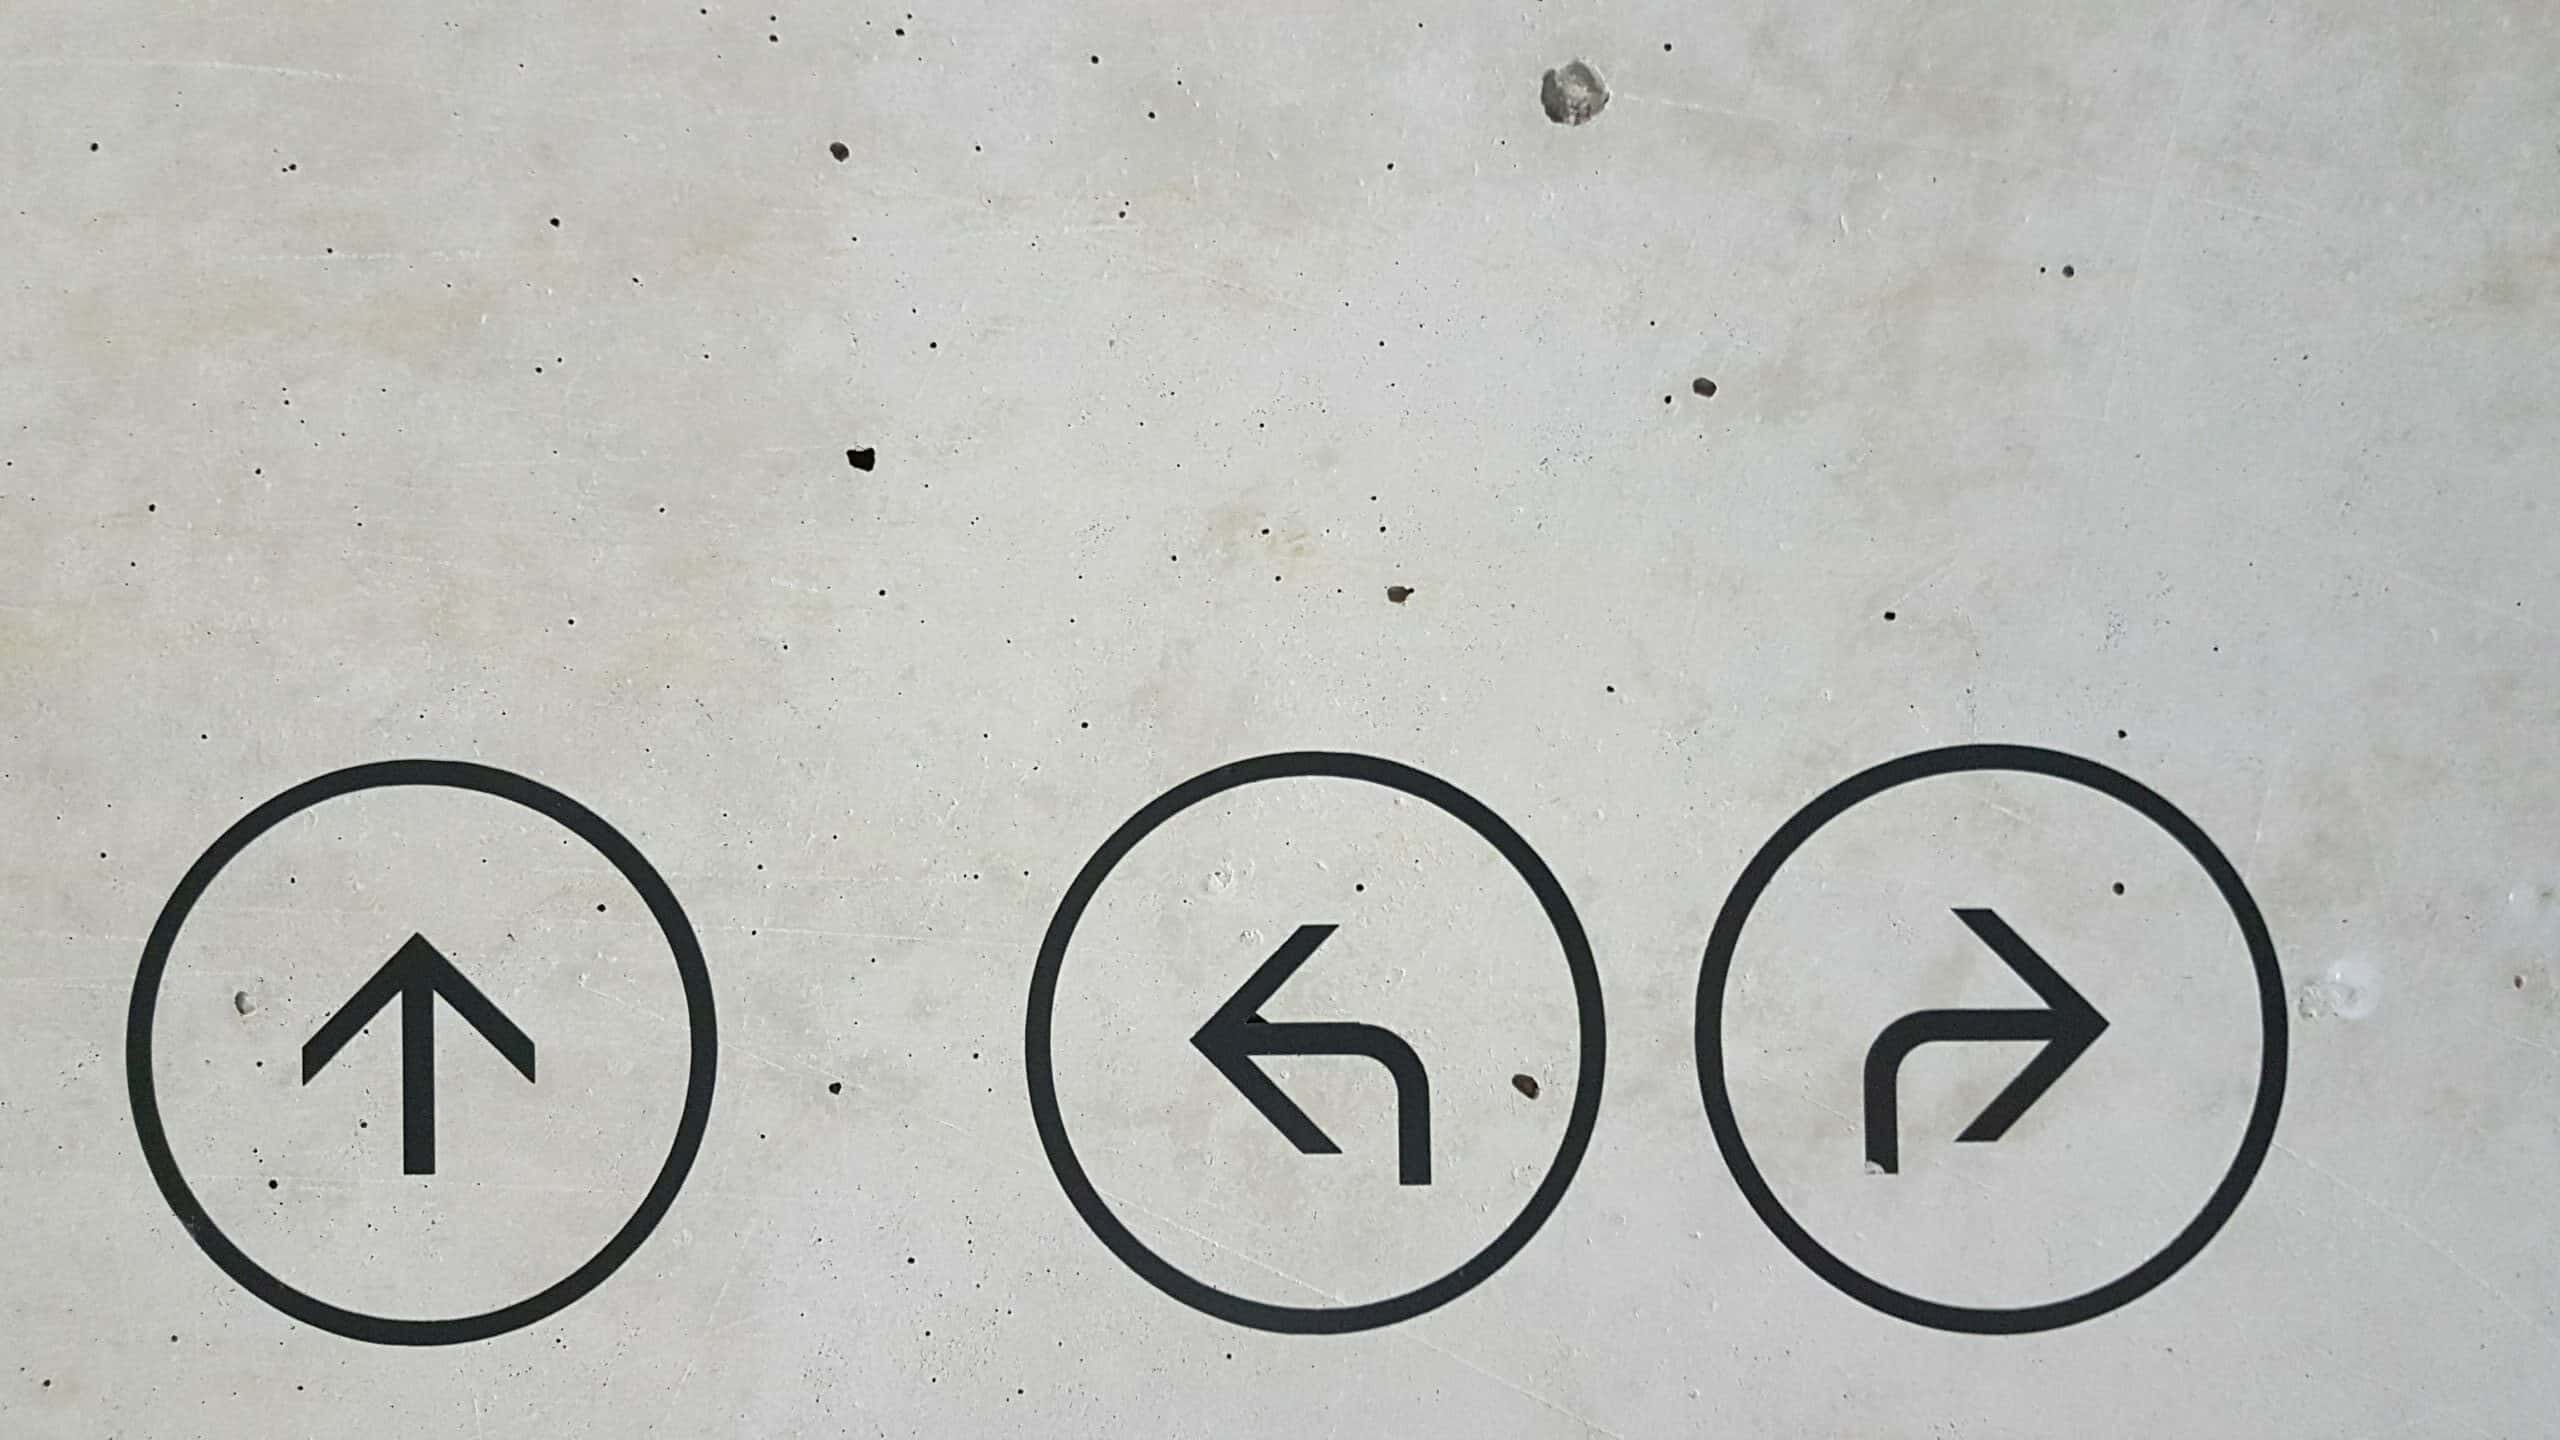 Image of 3 arrows pointing different directions on concrete for landing page blog